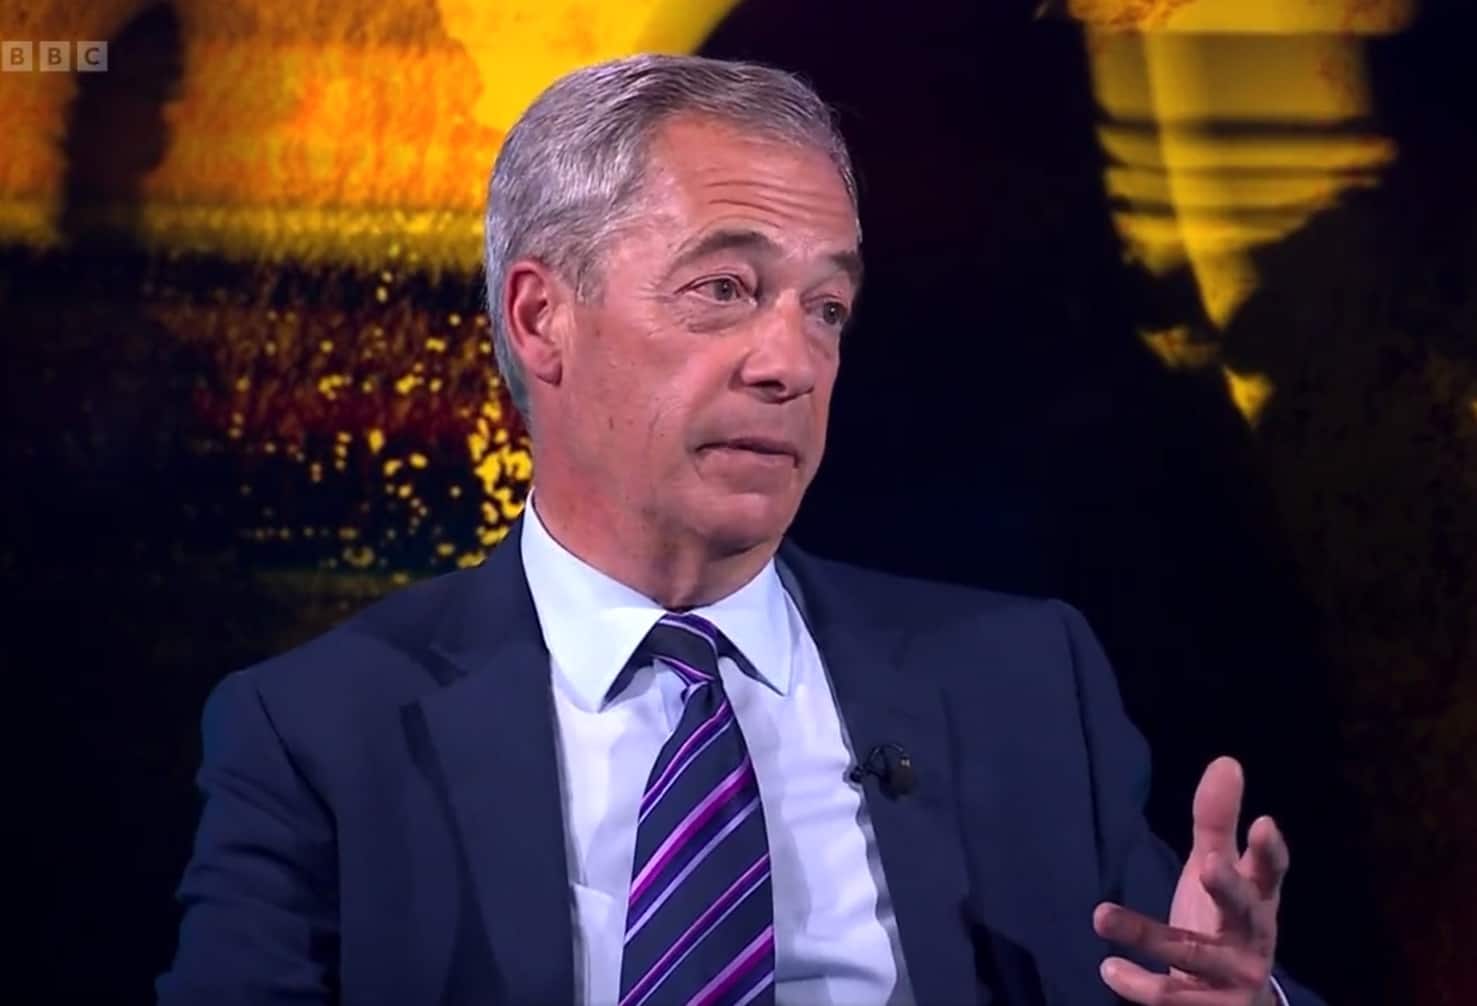 Farage says Brexit supporters will never back the Tories again